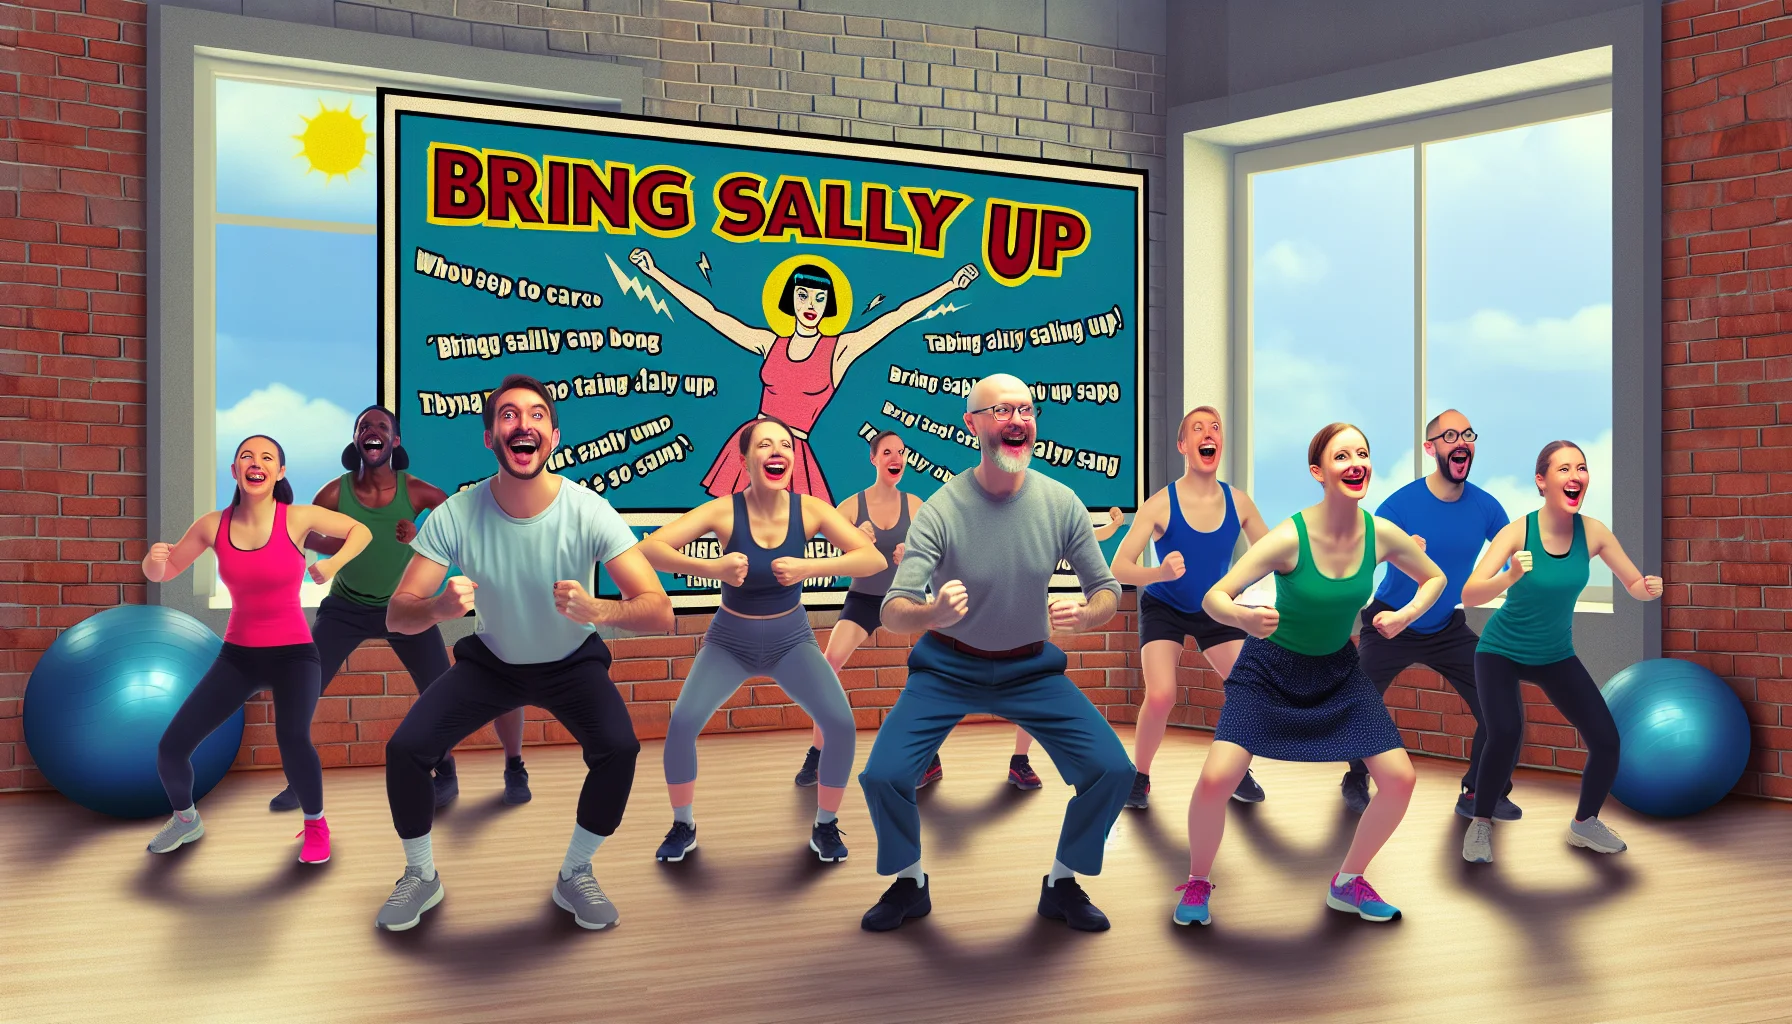 Create an amusing image that reflects the energetic atmosphere of a fitness setting, where people of different genders and descents are enthralled in a 'Bring Sally Up' workout synchronized to the rhythm of a Tabata song. Across the room, there's a poster on the wall displaying the lyrics to the Tabata song in a creative and enticing manner. The participants have expressive looks on their faces, inspiring and inviting viewers into this fun-filled workout scenario.